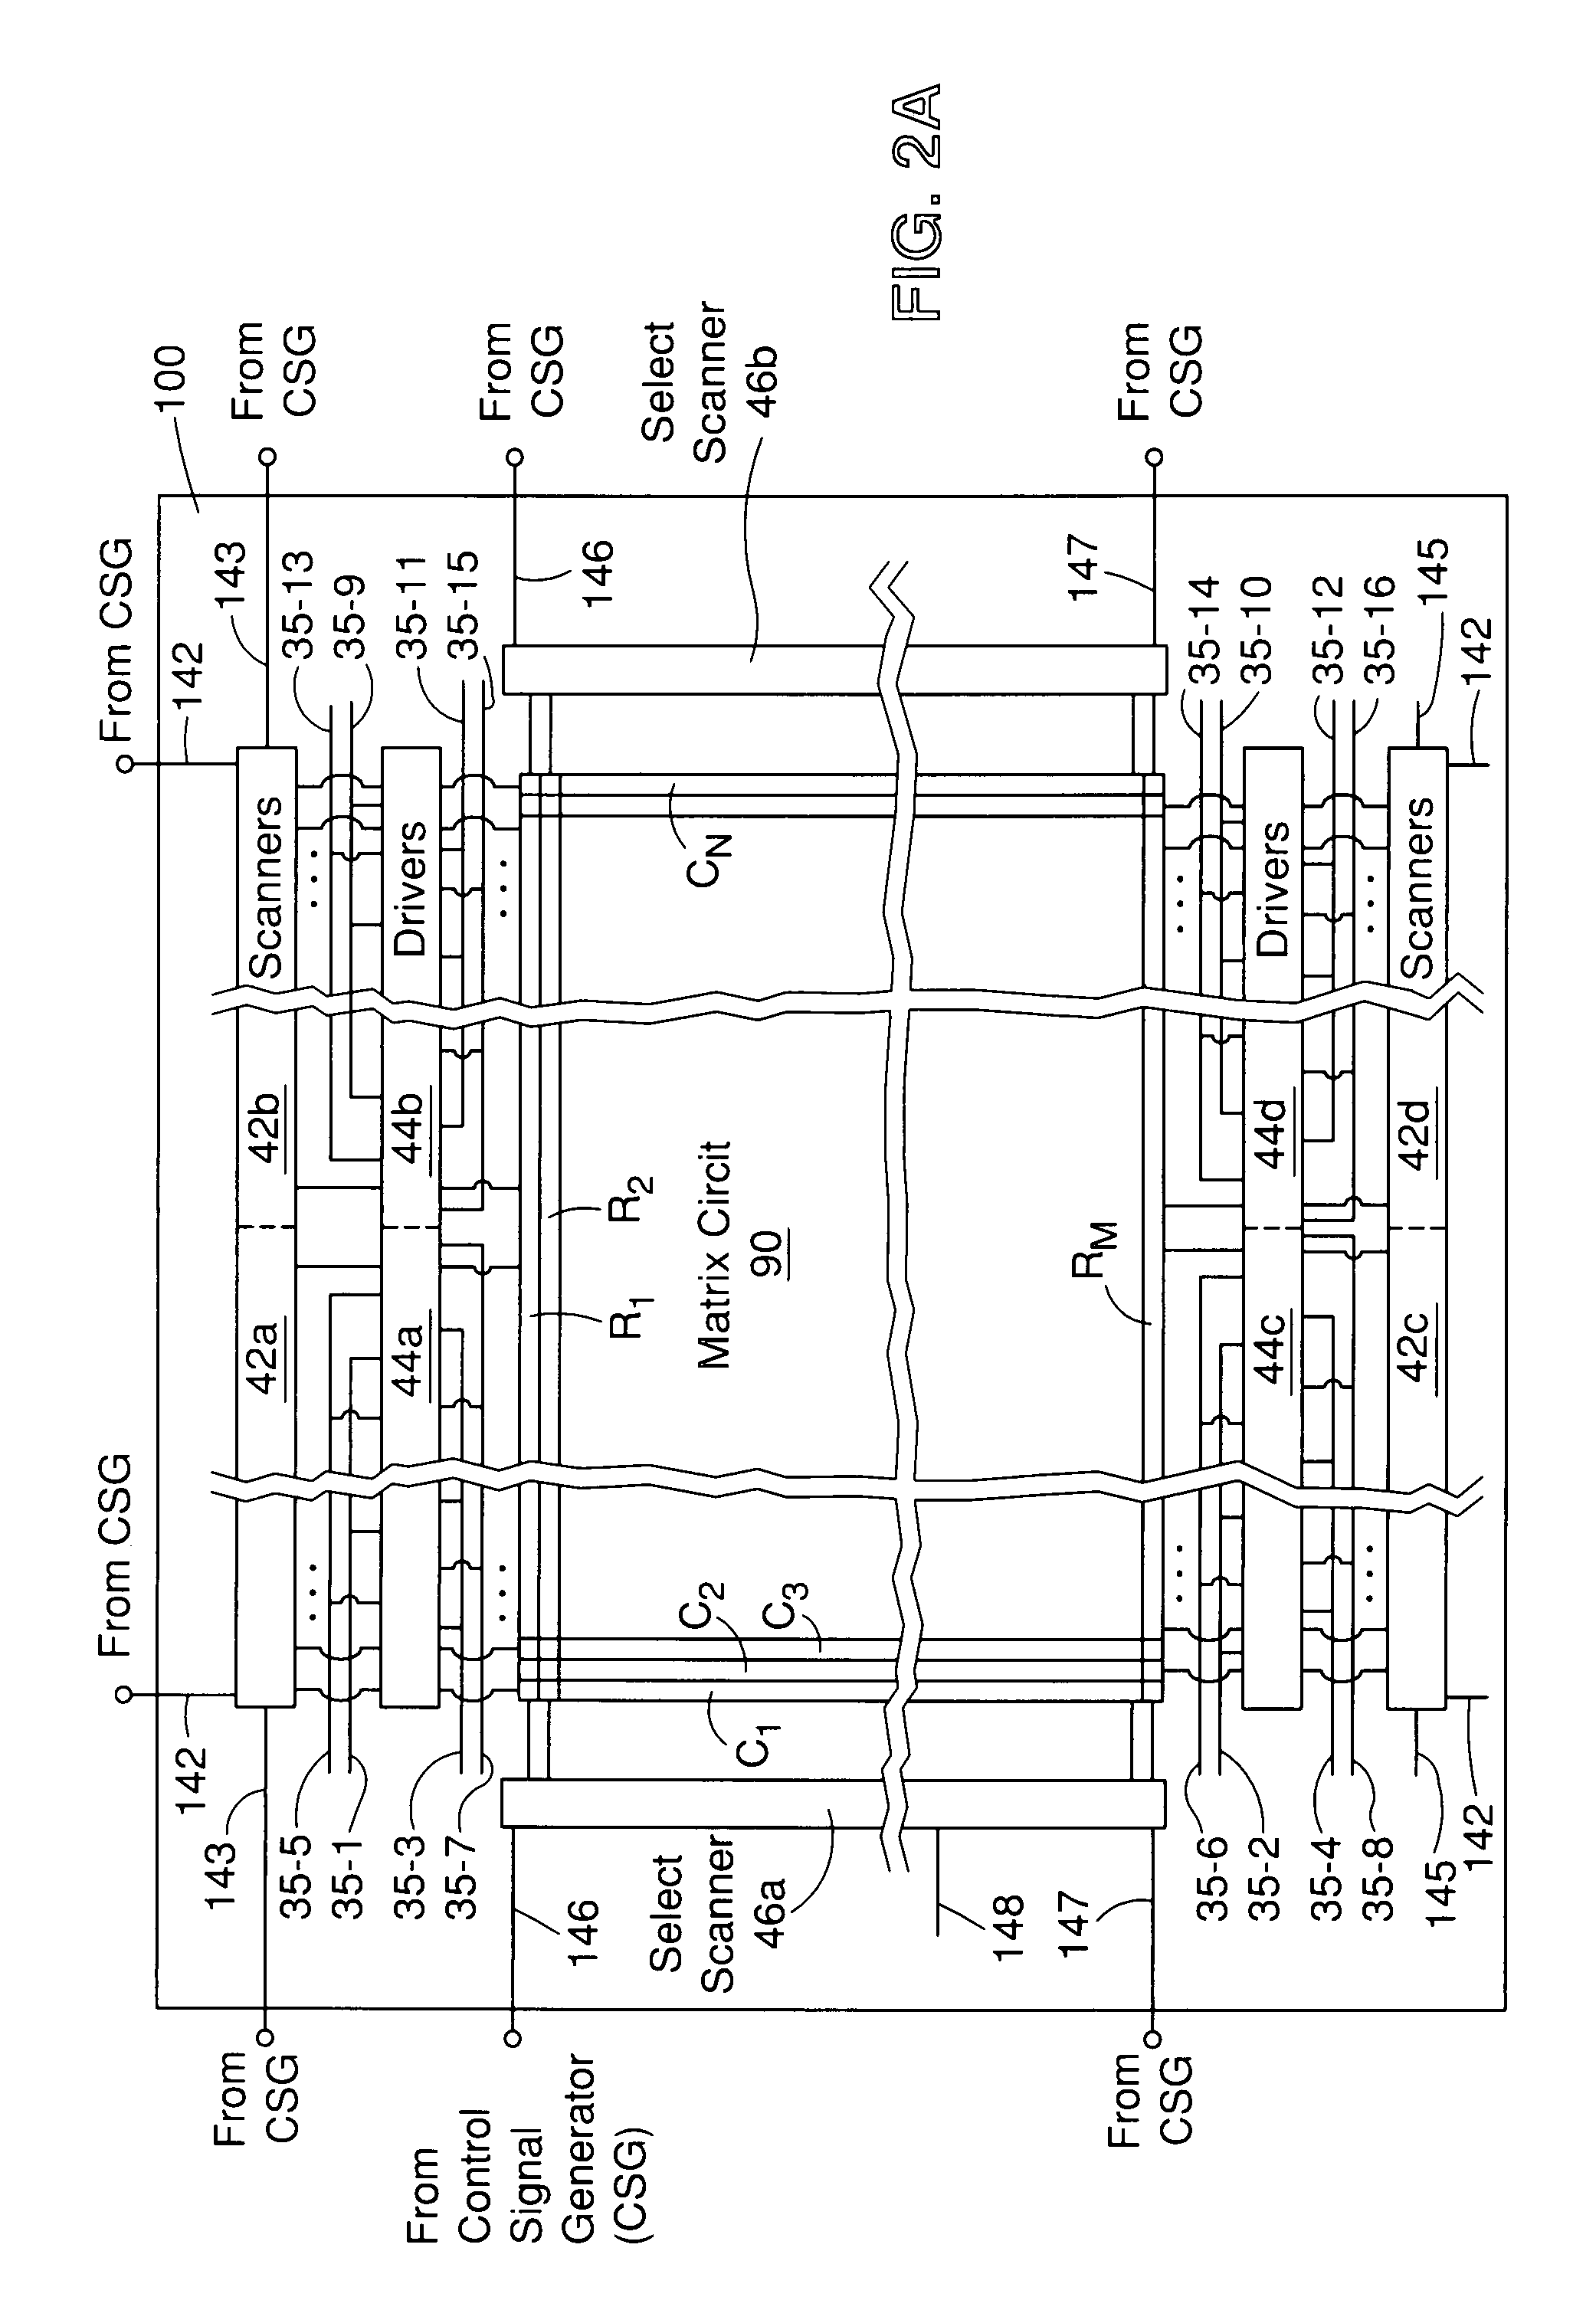 Microdisplay for portable communication systems